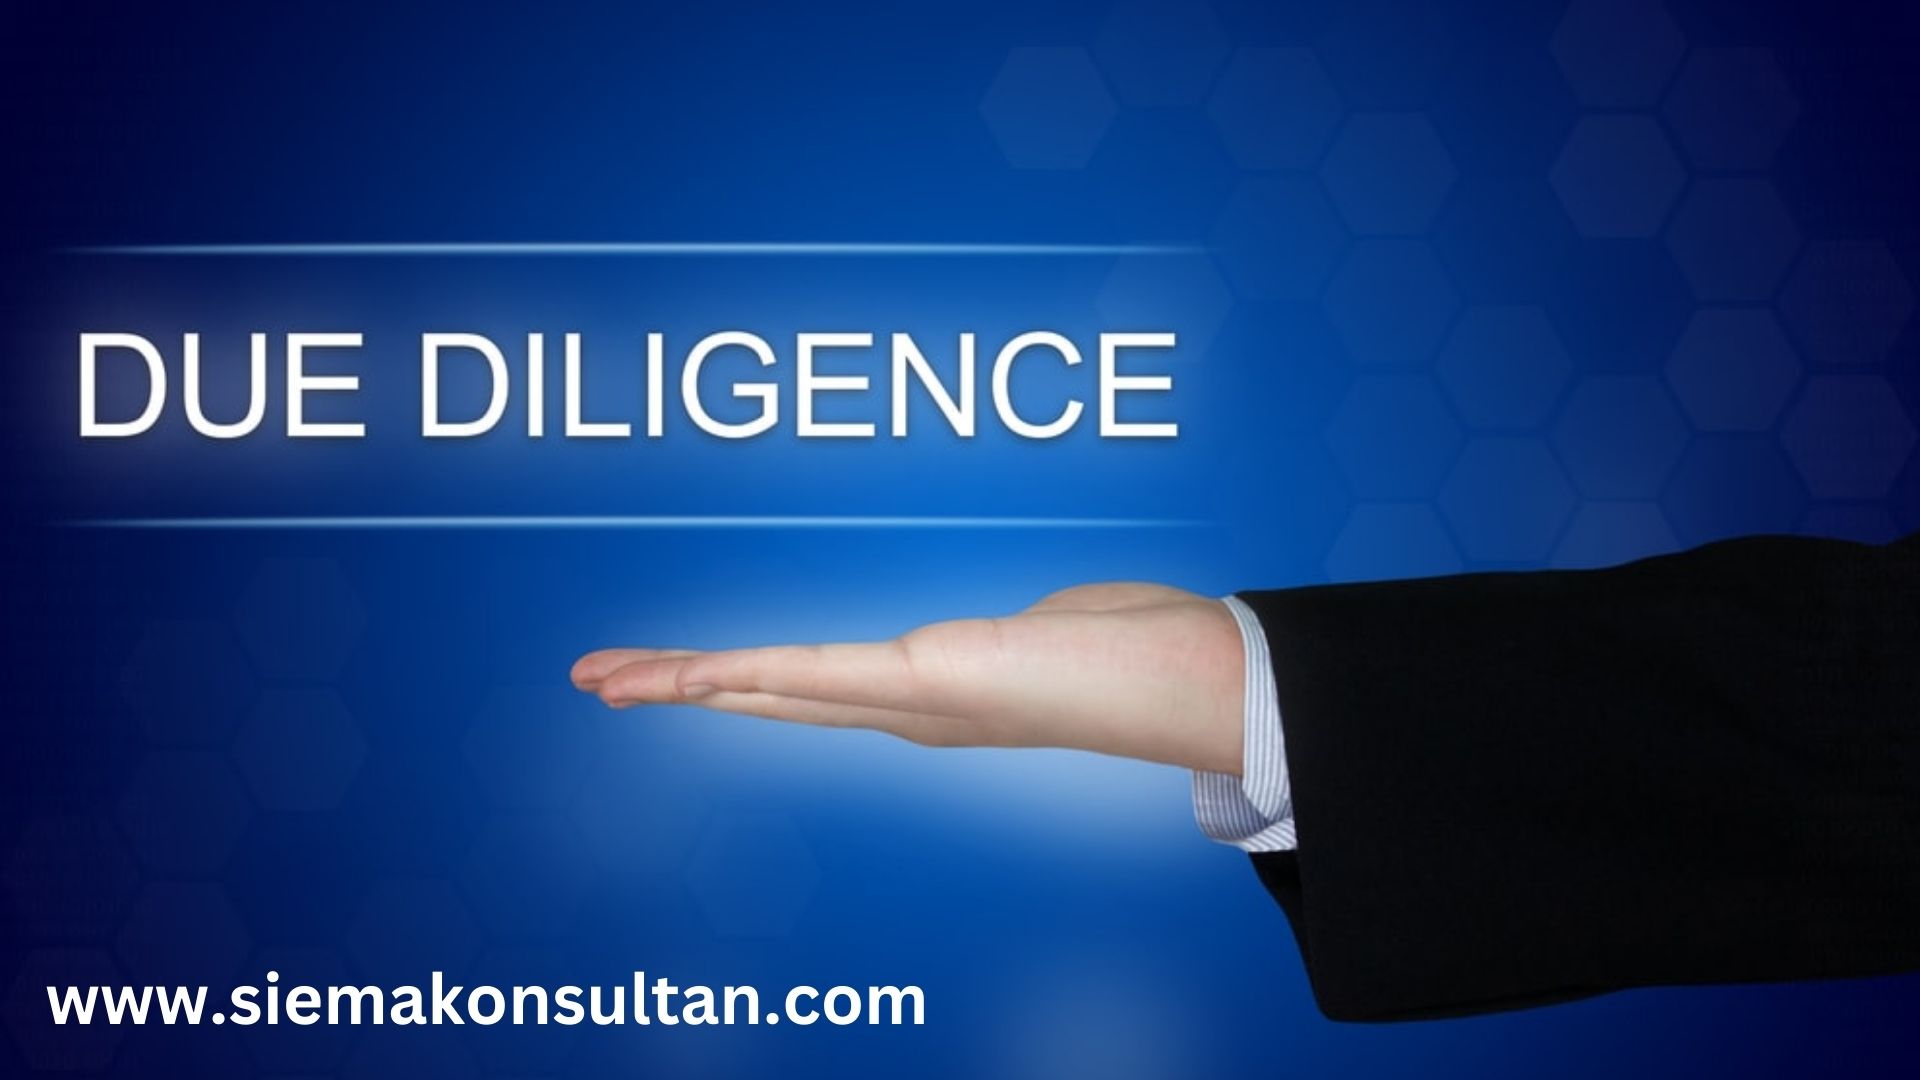 Due Diligence As An Important Foundation Of Your Company's Development